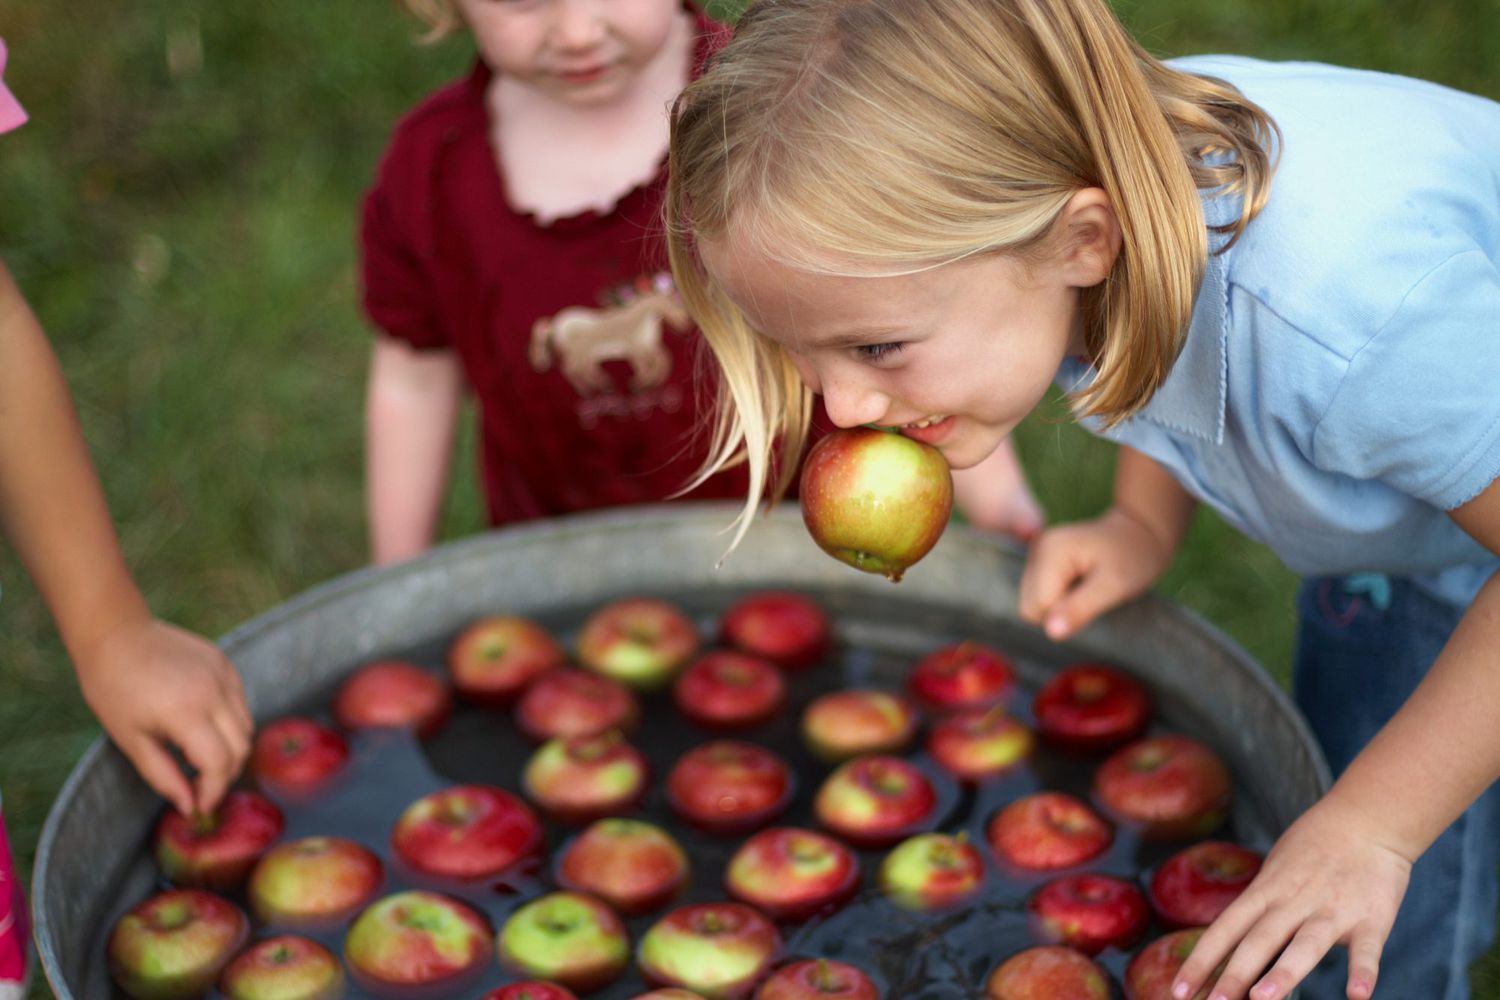 18 Fascinating Facts About Bobbing For Apples - Facts.net